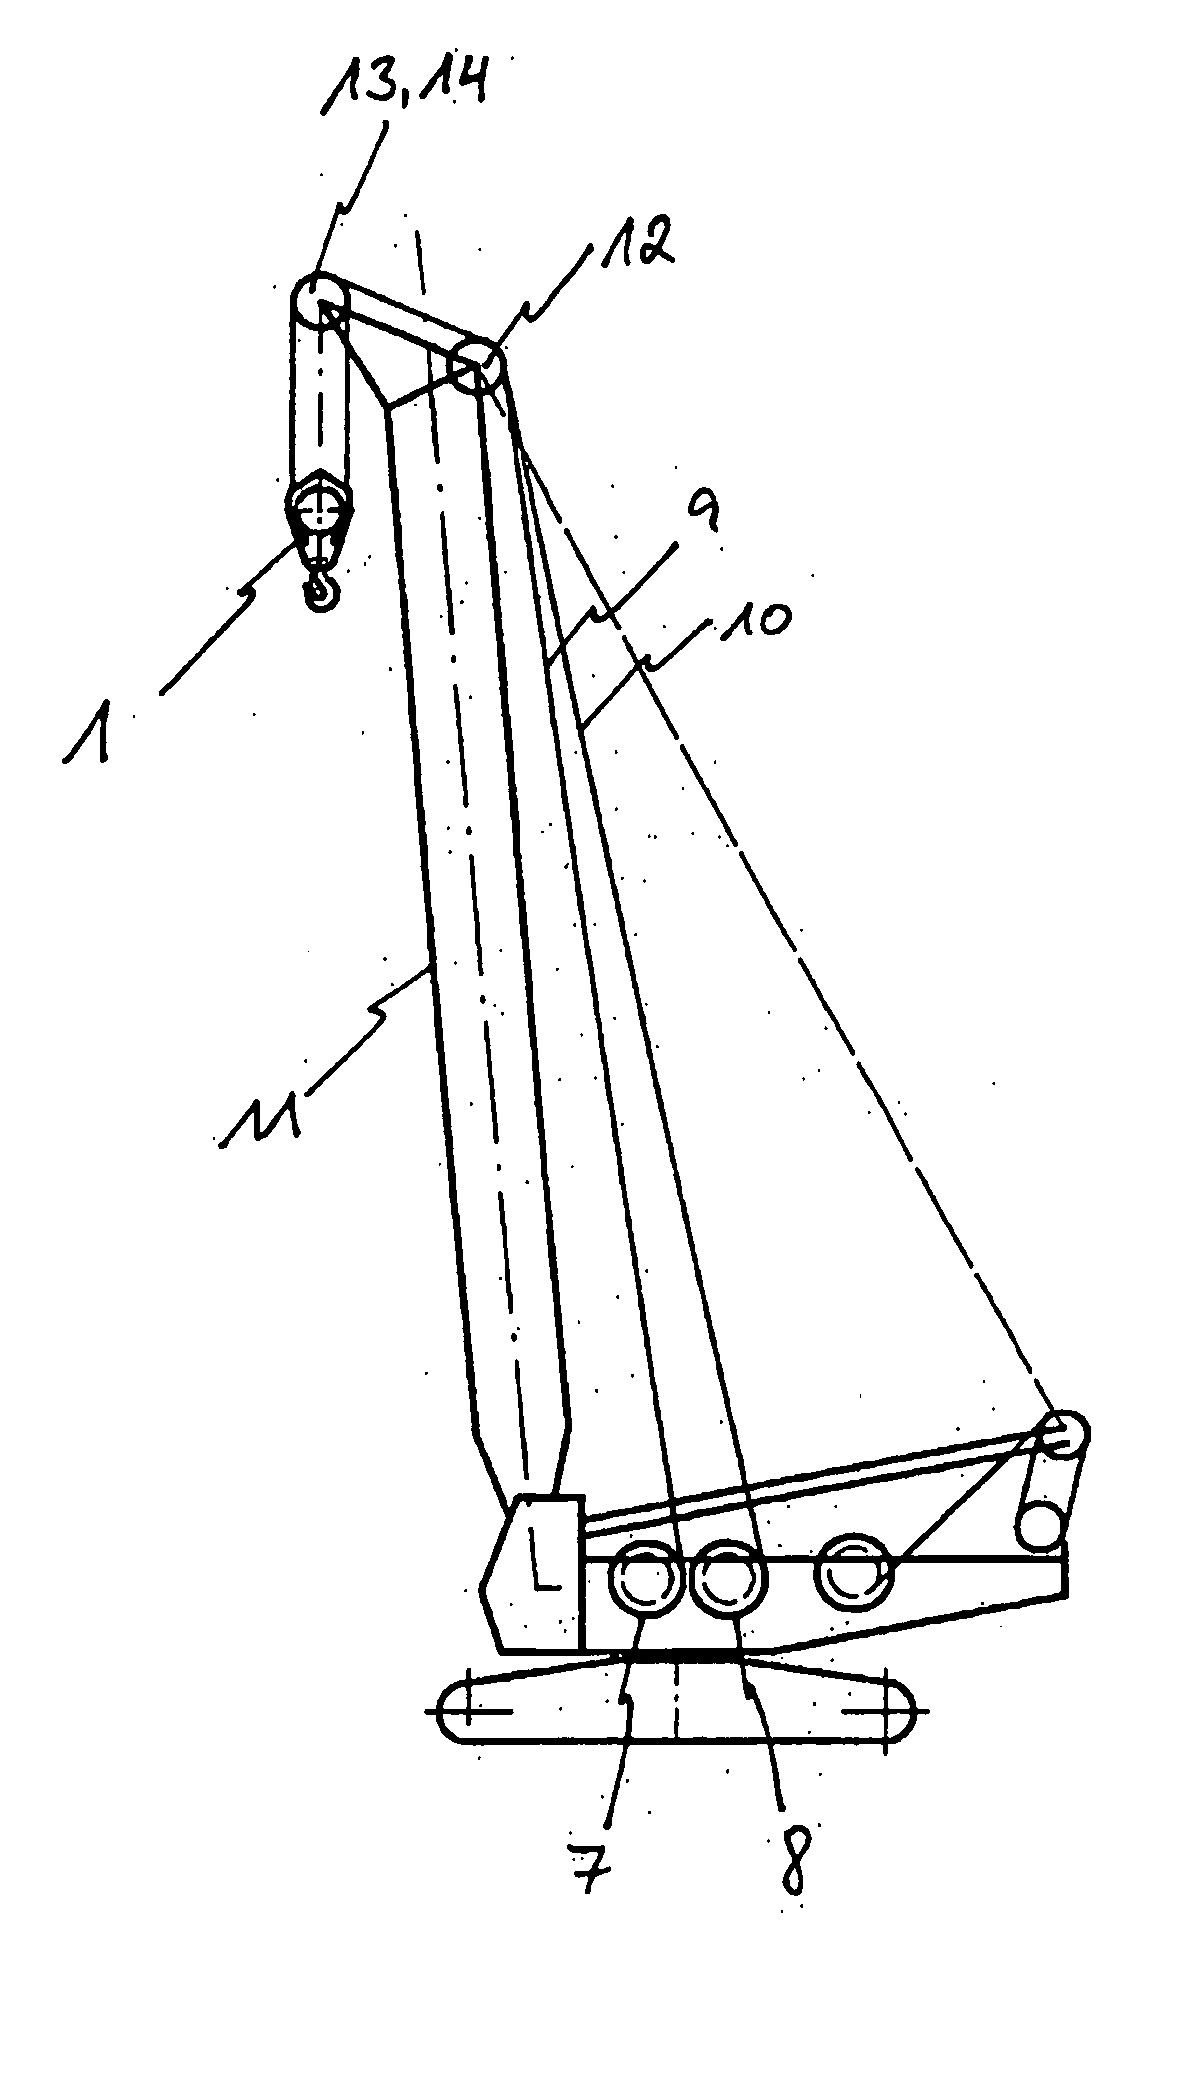 Hoisting-Cable Drive Comprising a Single Bottom-Hook Block and Two Winches